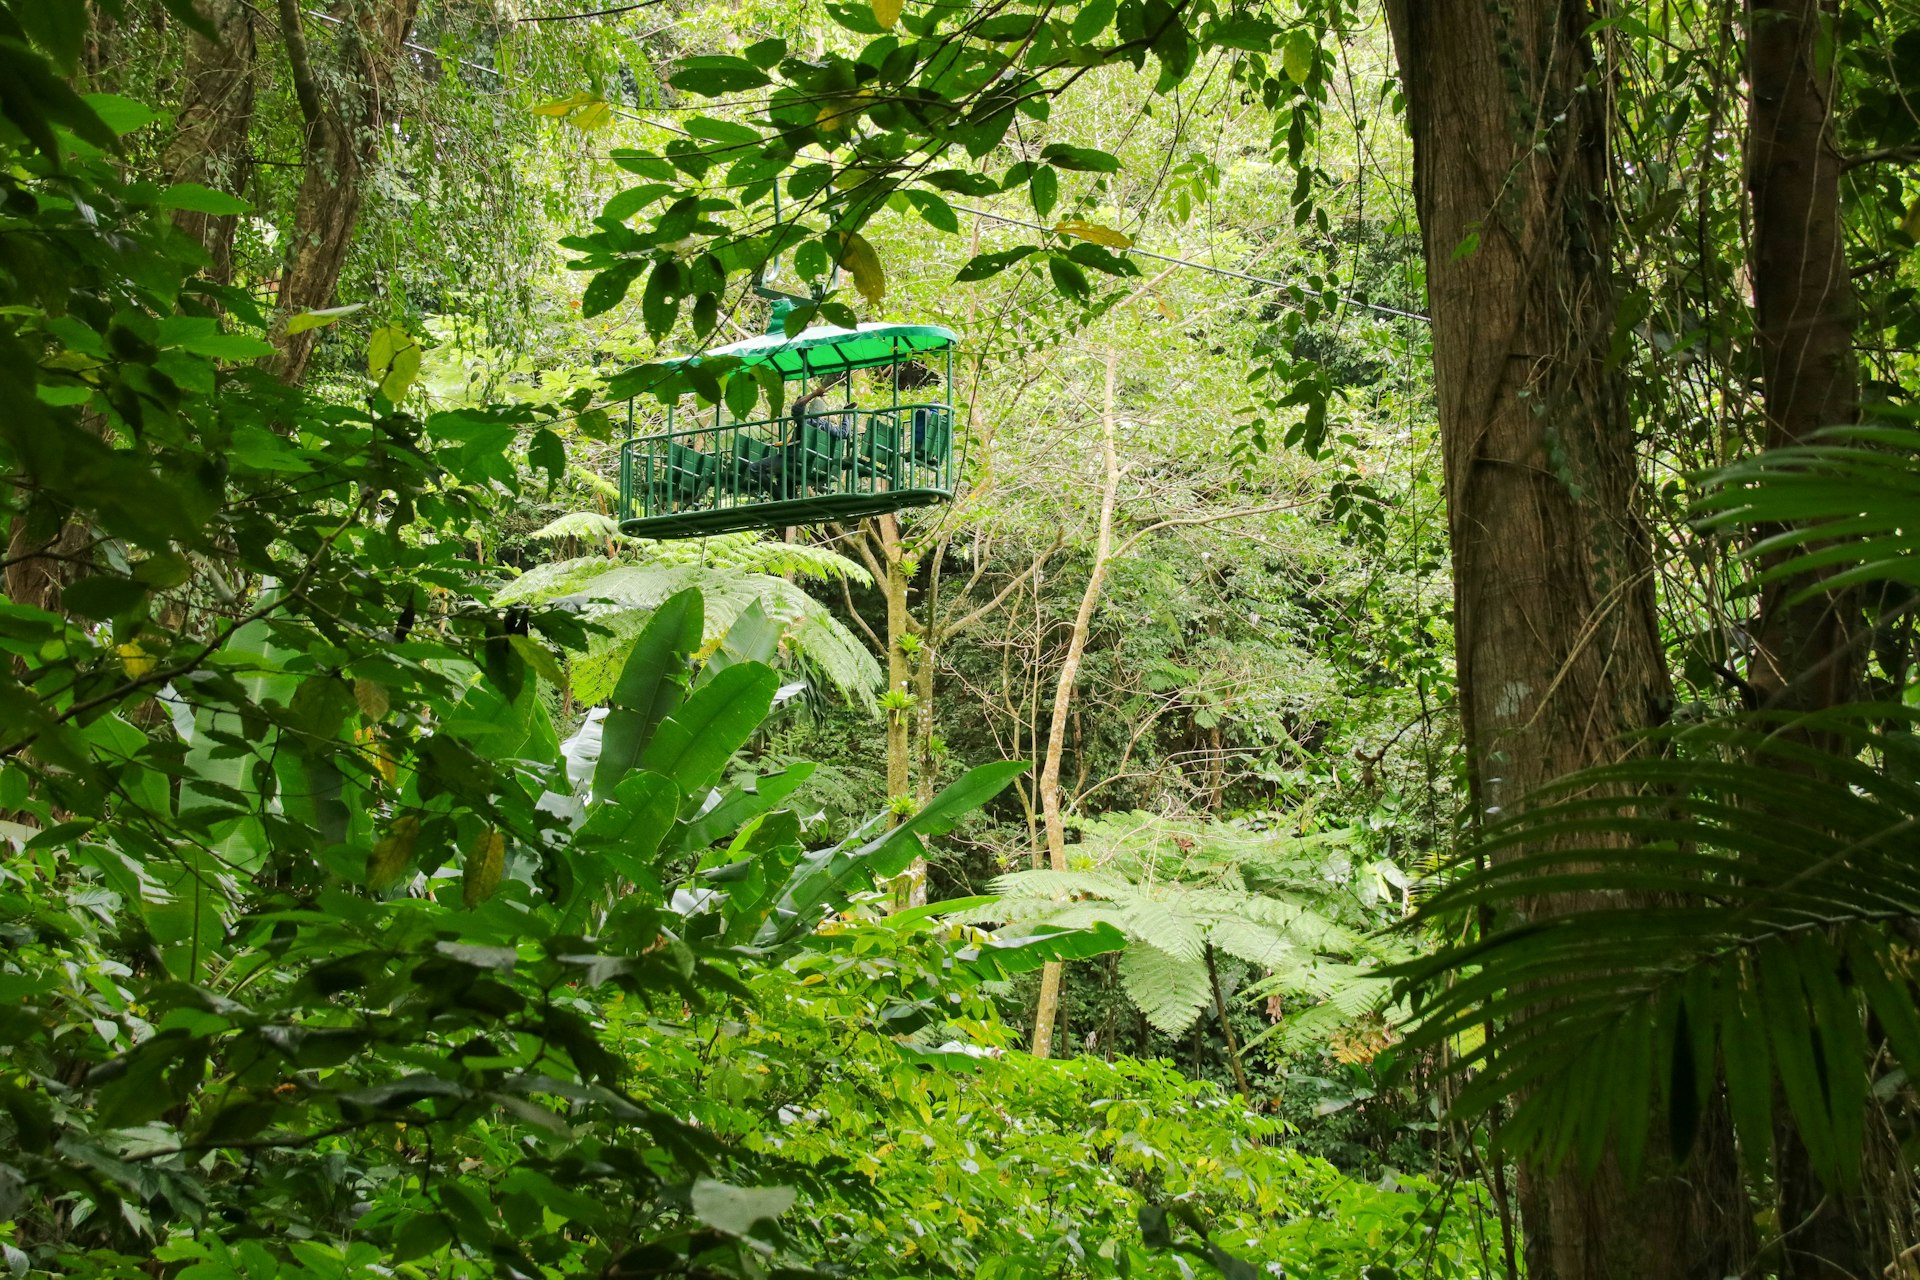 An open-sided green carriage is lifted via cable through dense rainforest